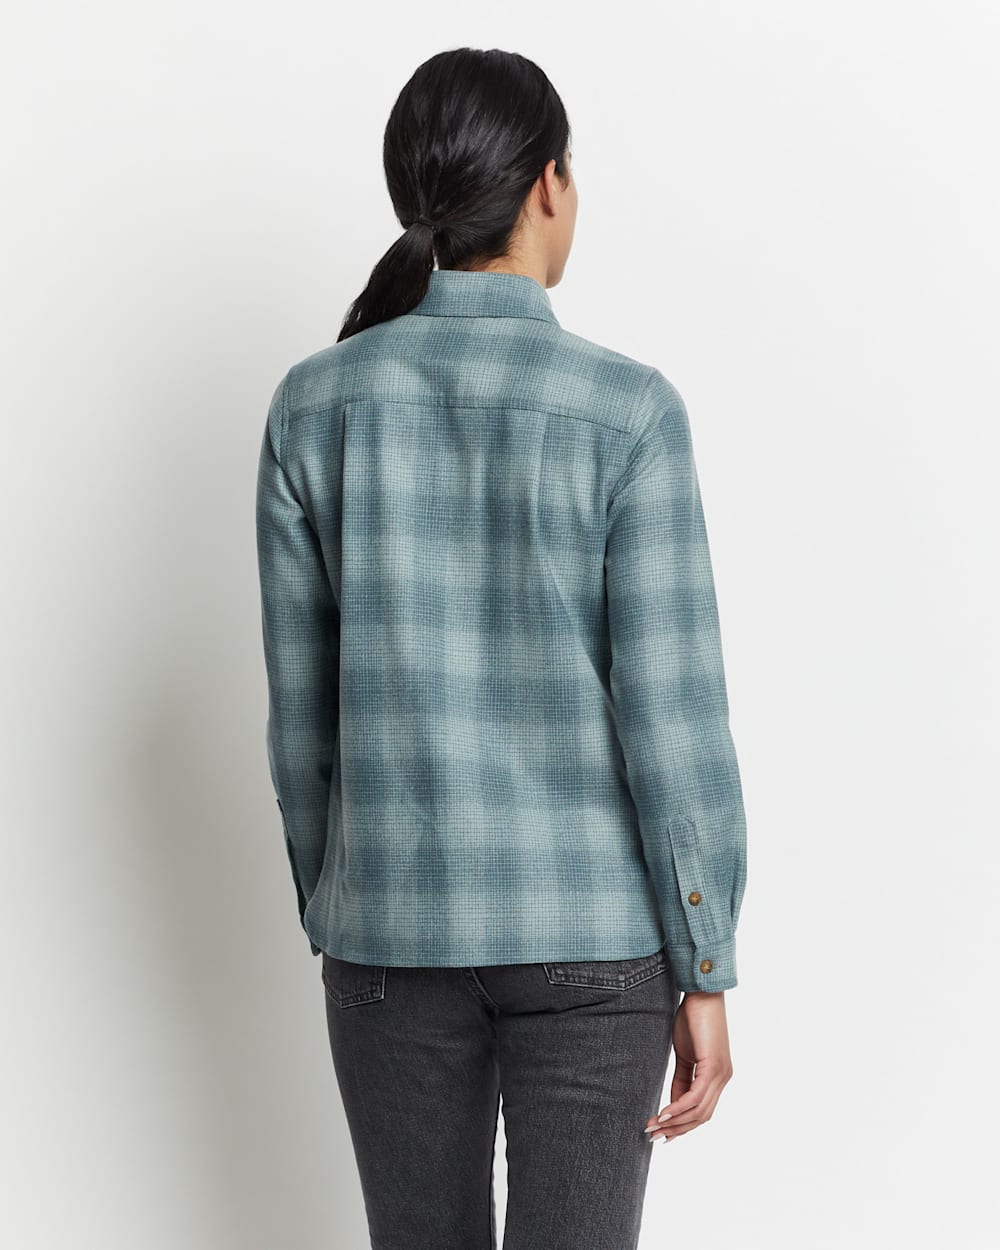 ALTERNATE VIEW OF WOMEN'S BOARD SHIRT IN BLUE SHADOW PLAID image number 5